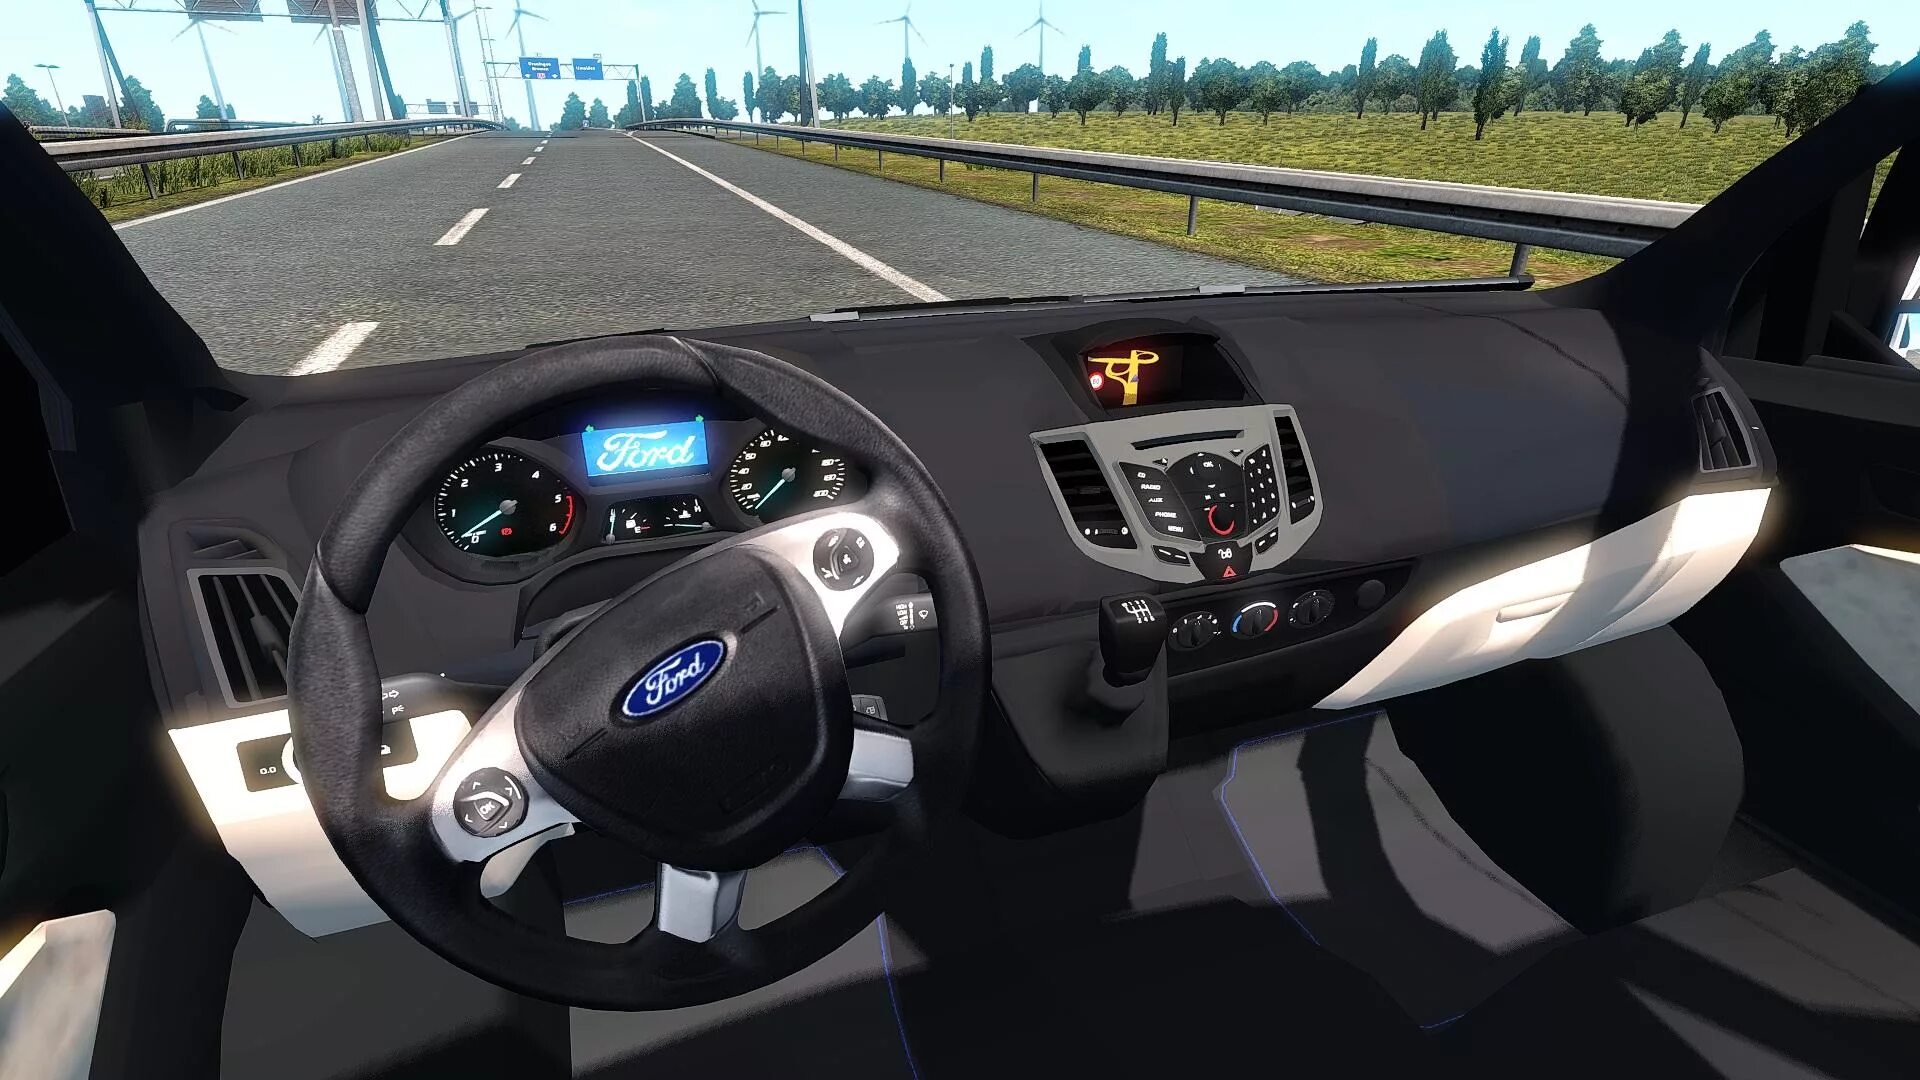 Мод форд транзит. Форд Транзит етс 2. Моды етс 2 Форд Транзит. Ford Transit для ETS. ETS 2 Ford.